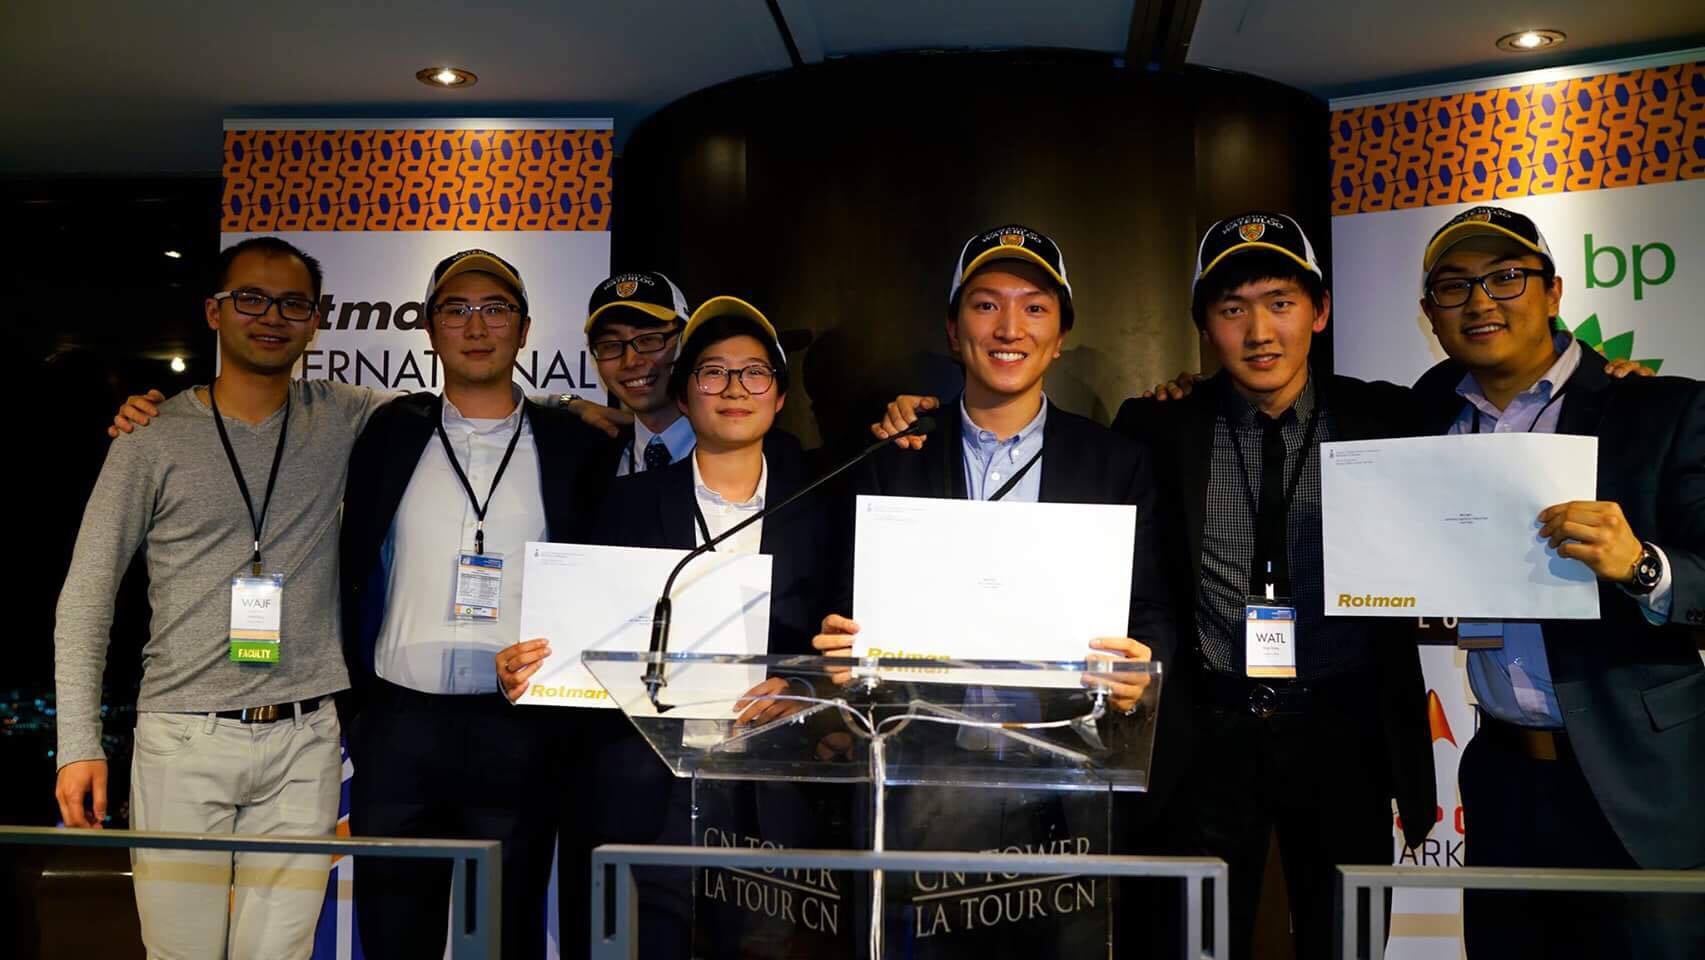 University of Waterloo Rotman Intermational Trading Competition team - from left to right in this photo are Jimmy Fang (team coach), Boyang Li, Jing Tang, Jessie Guo, Hanson Li, Alex Wang and Charles Zhao